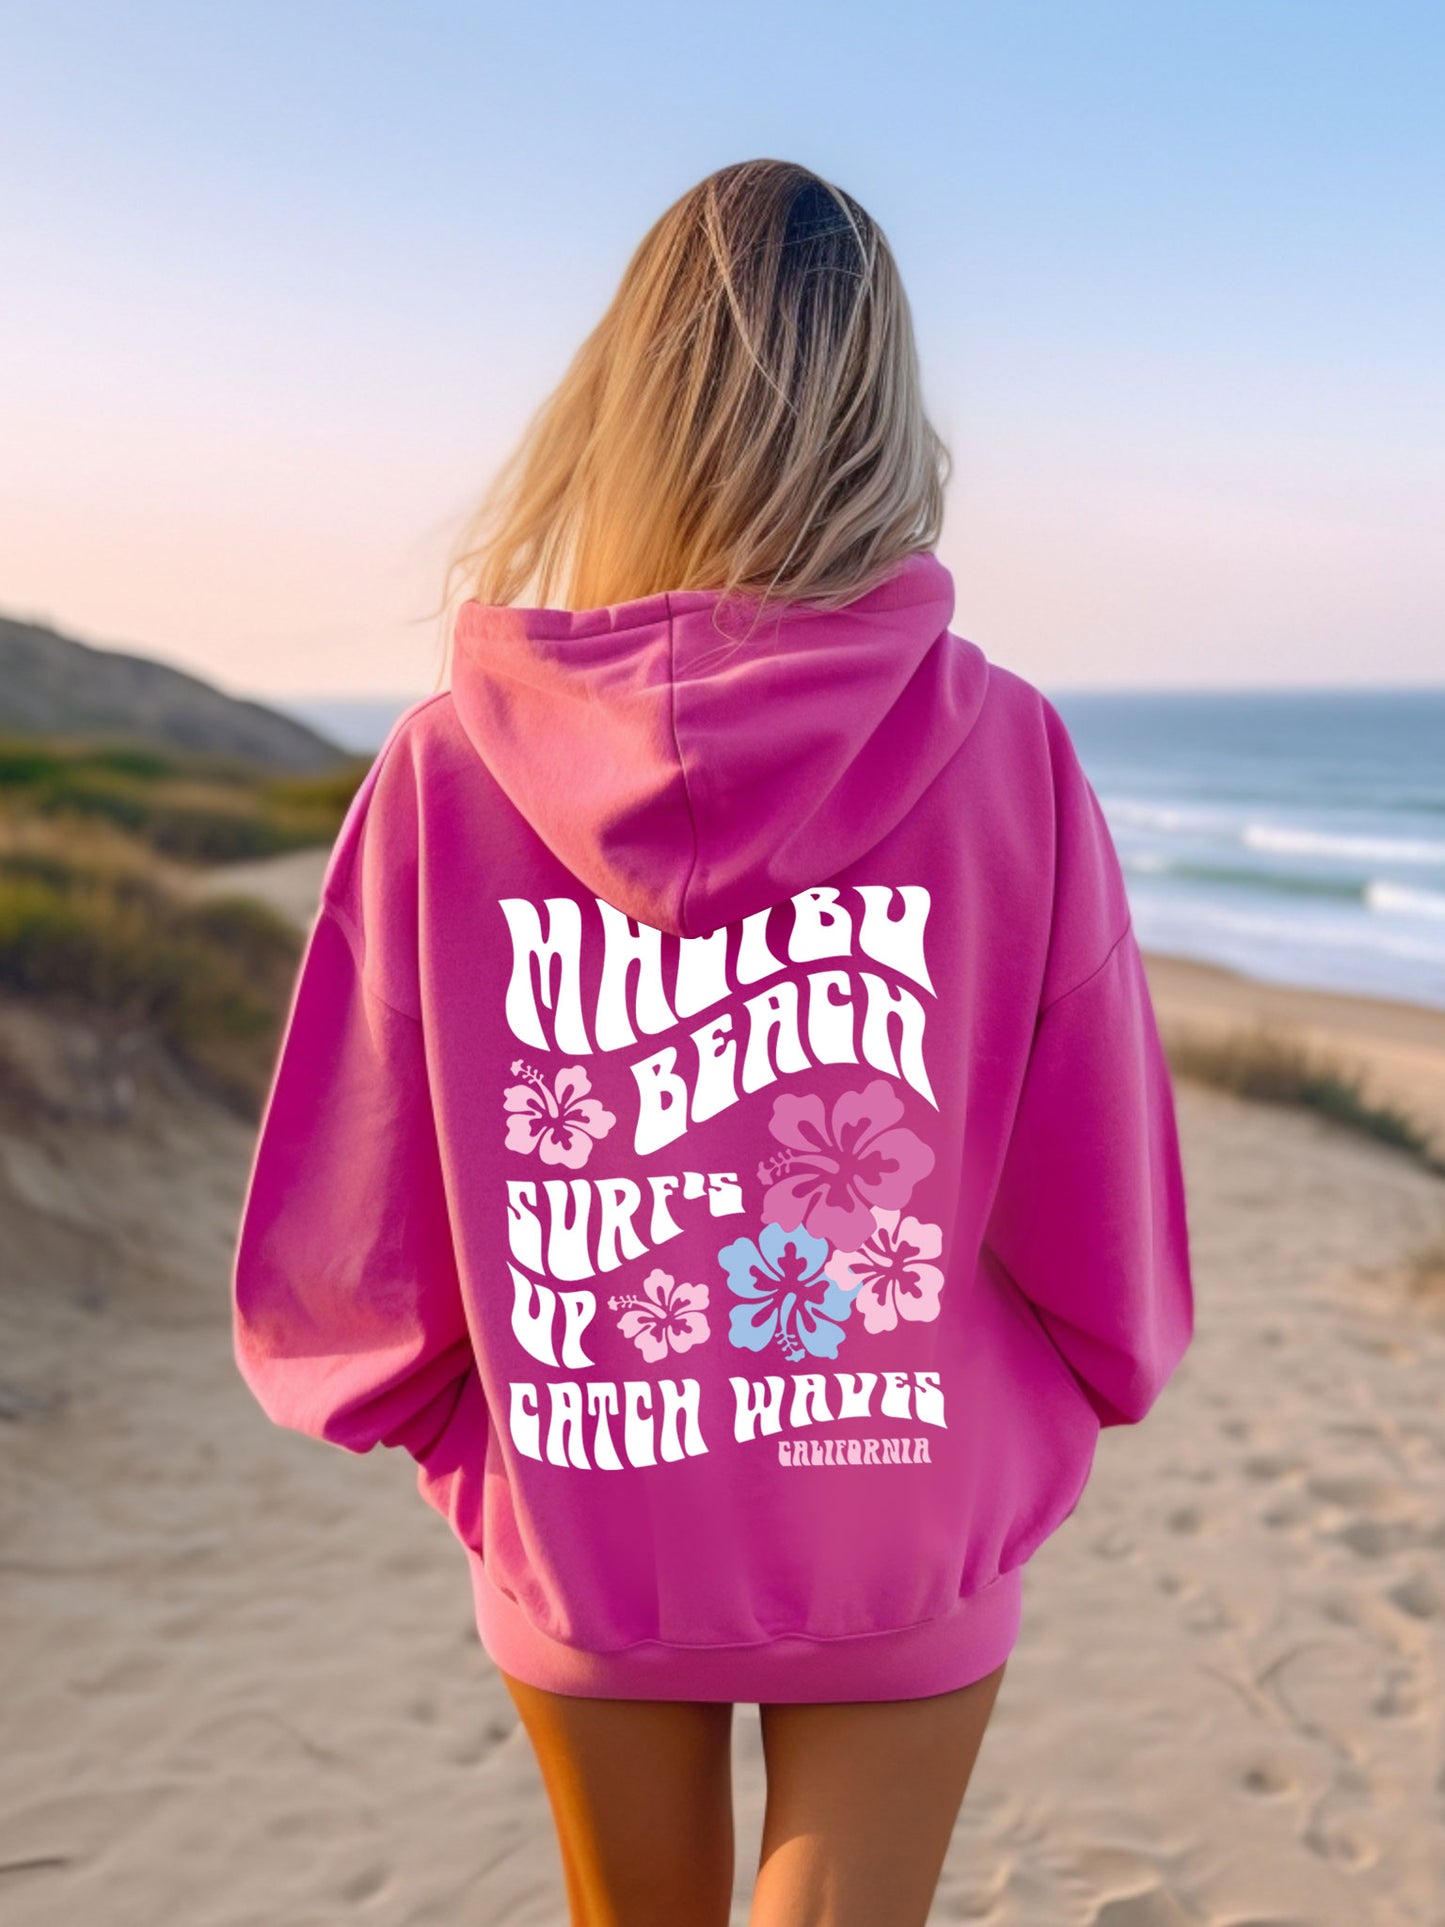 Coconut Girl Hibiscus Surf Hoodie Hot Pink Heliconia with White and Colorful Ink Malibu Beach California